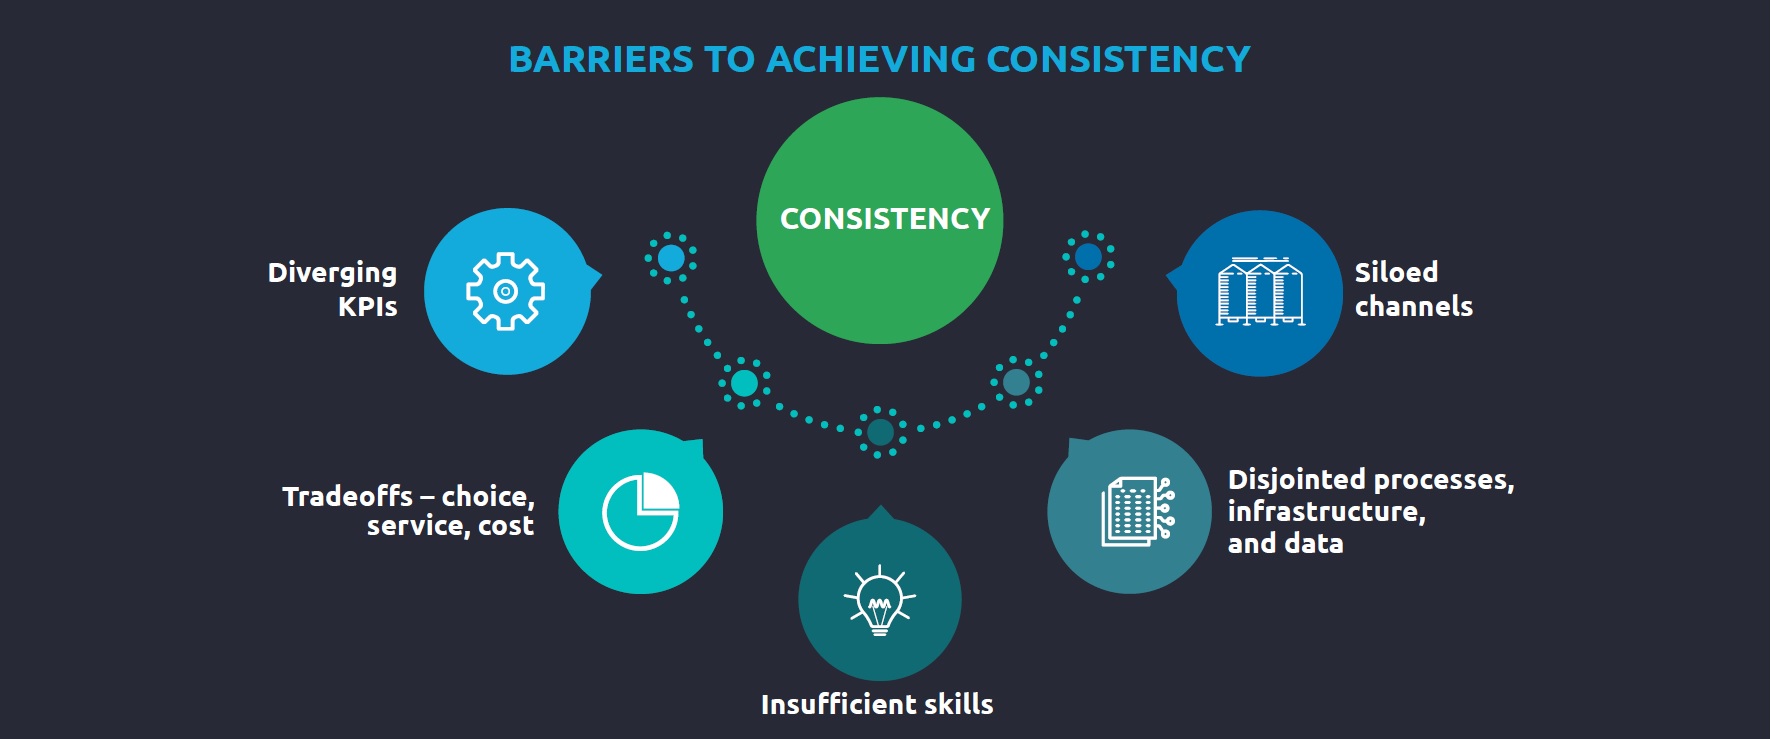 BARRIERS TO ACHIEVING CONSISTENCY